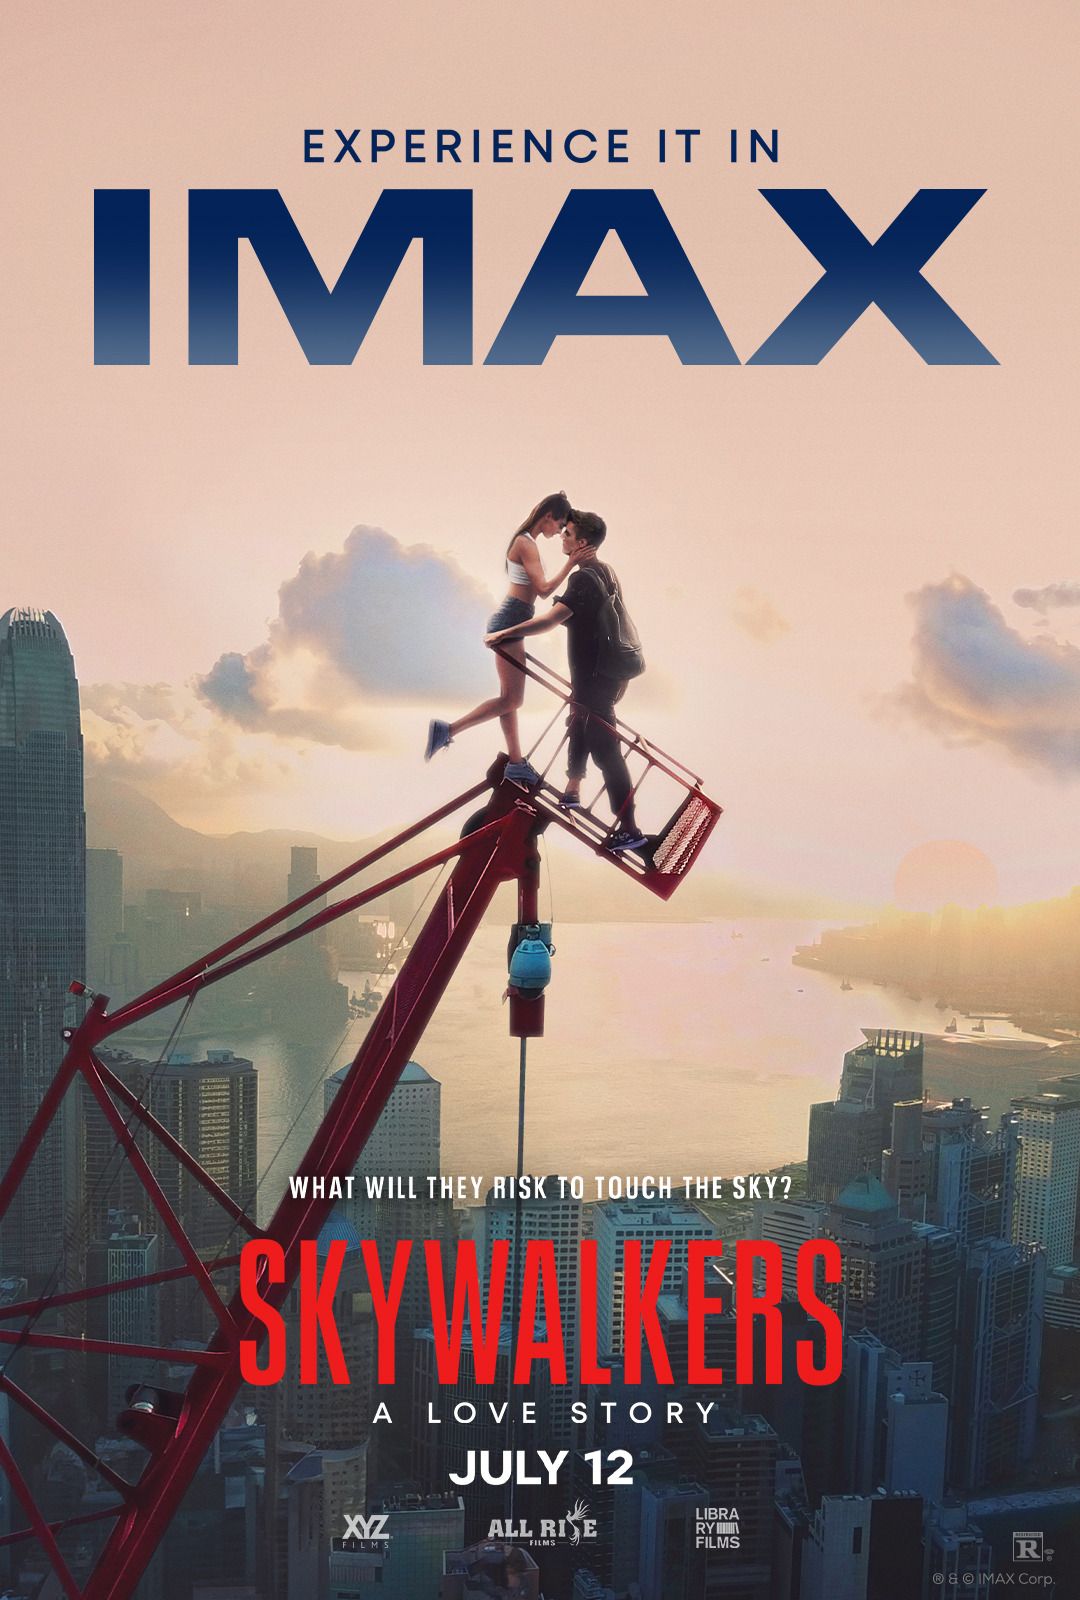 A couple poses on top of a skyscraper silhouetted at sunset on an IMAX poster.